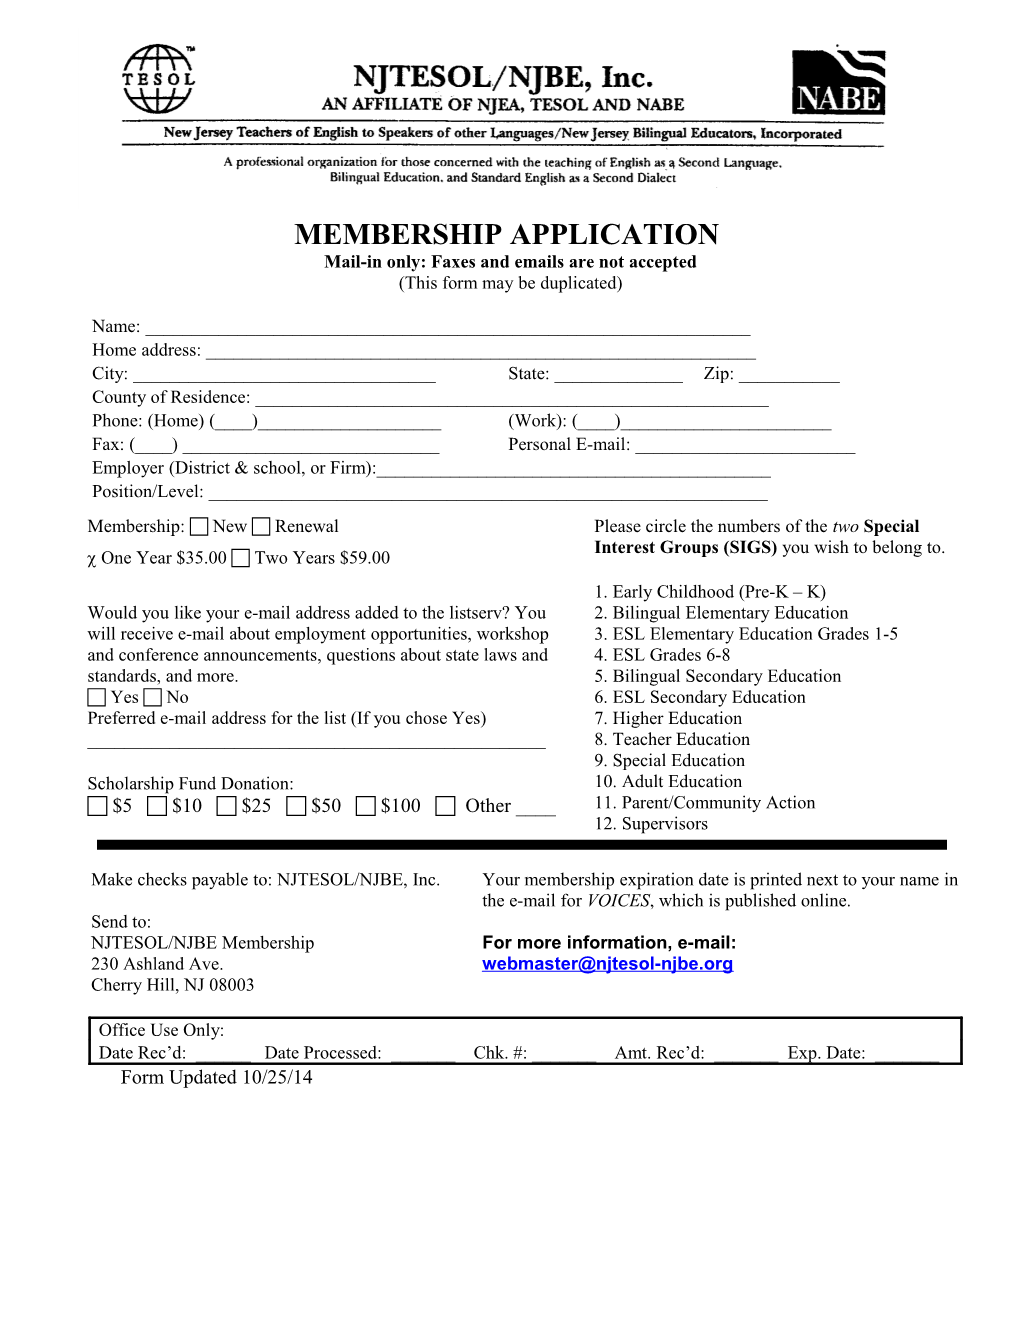 MEMBERSHIP APPLICATION Mail-In Only: Faxes and Emails Are Not Accepted